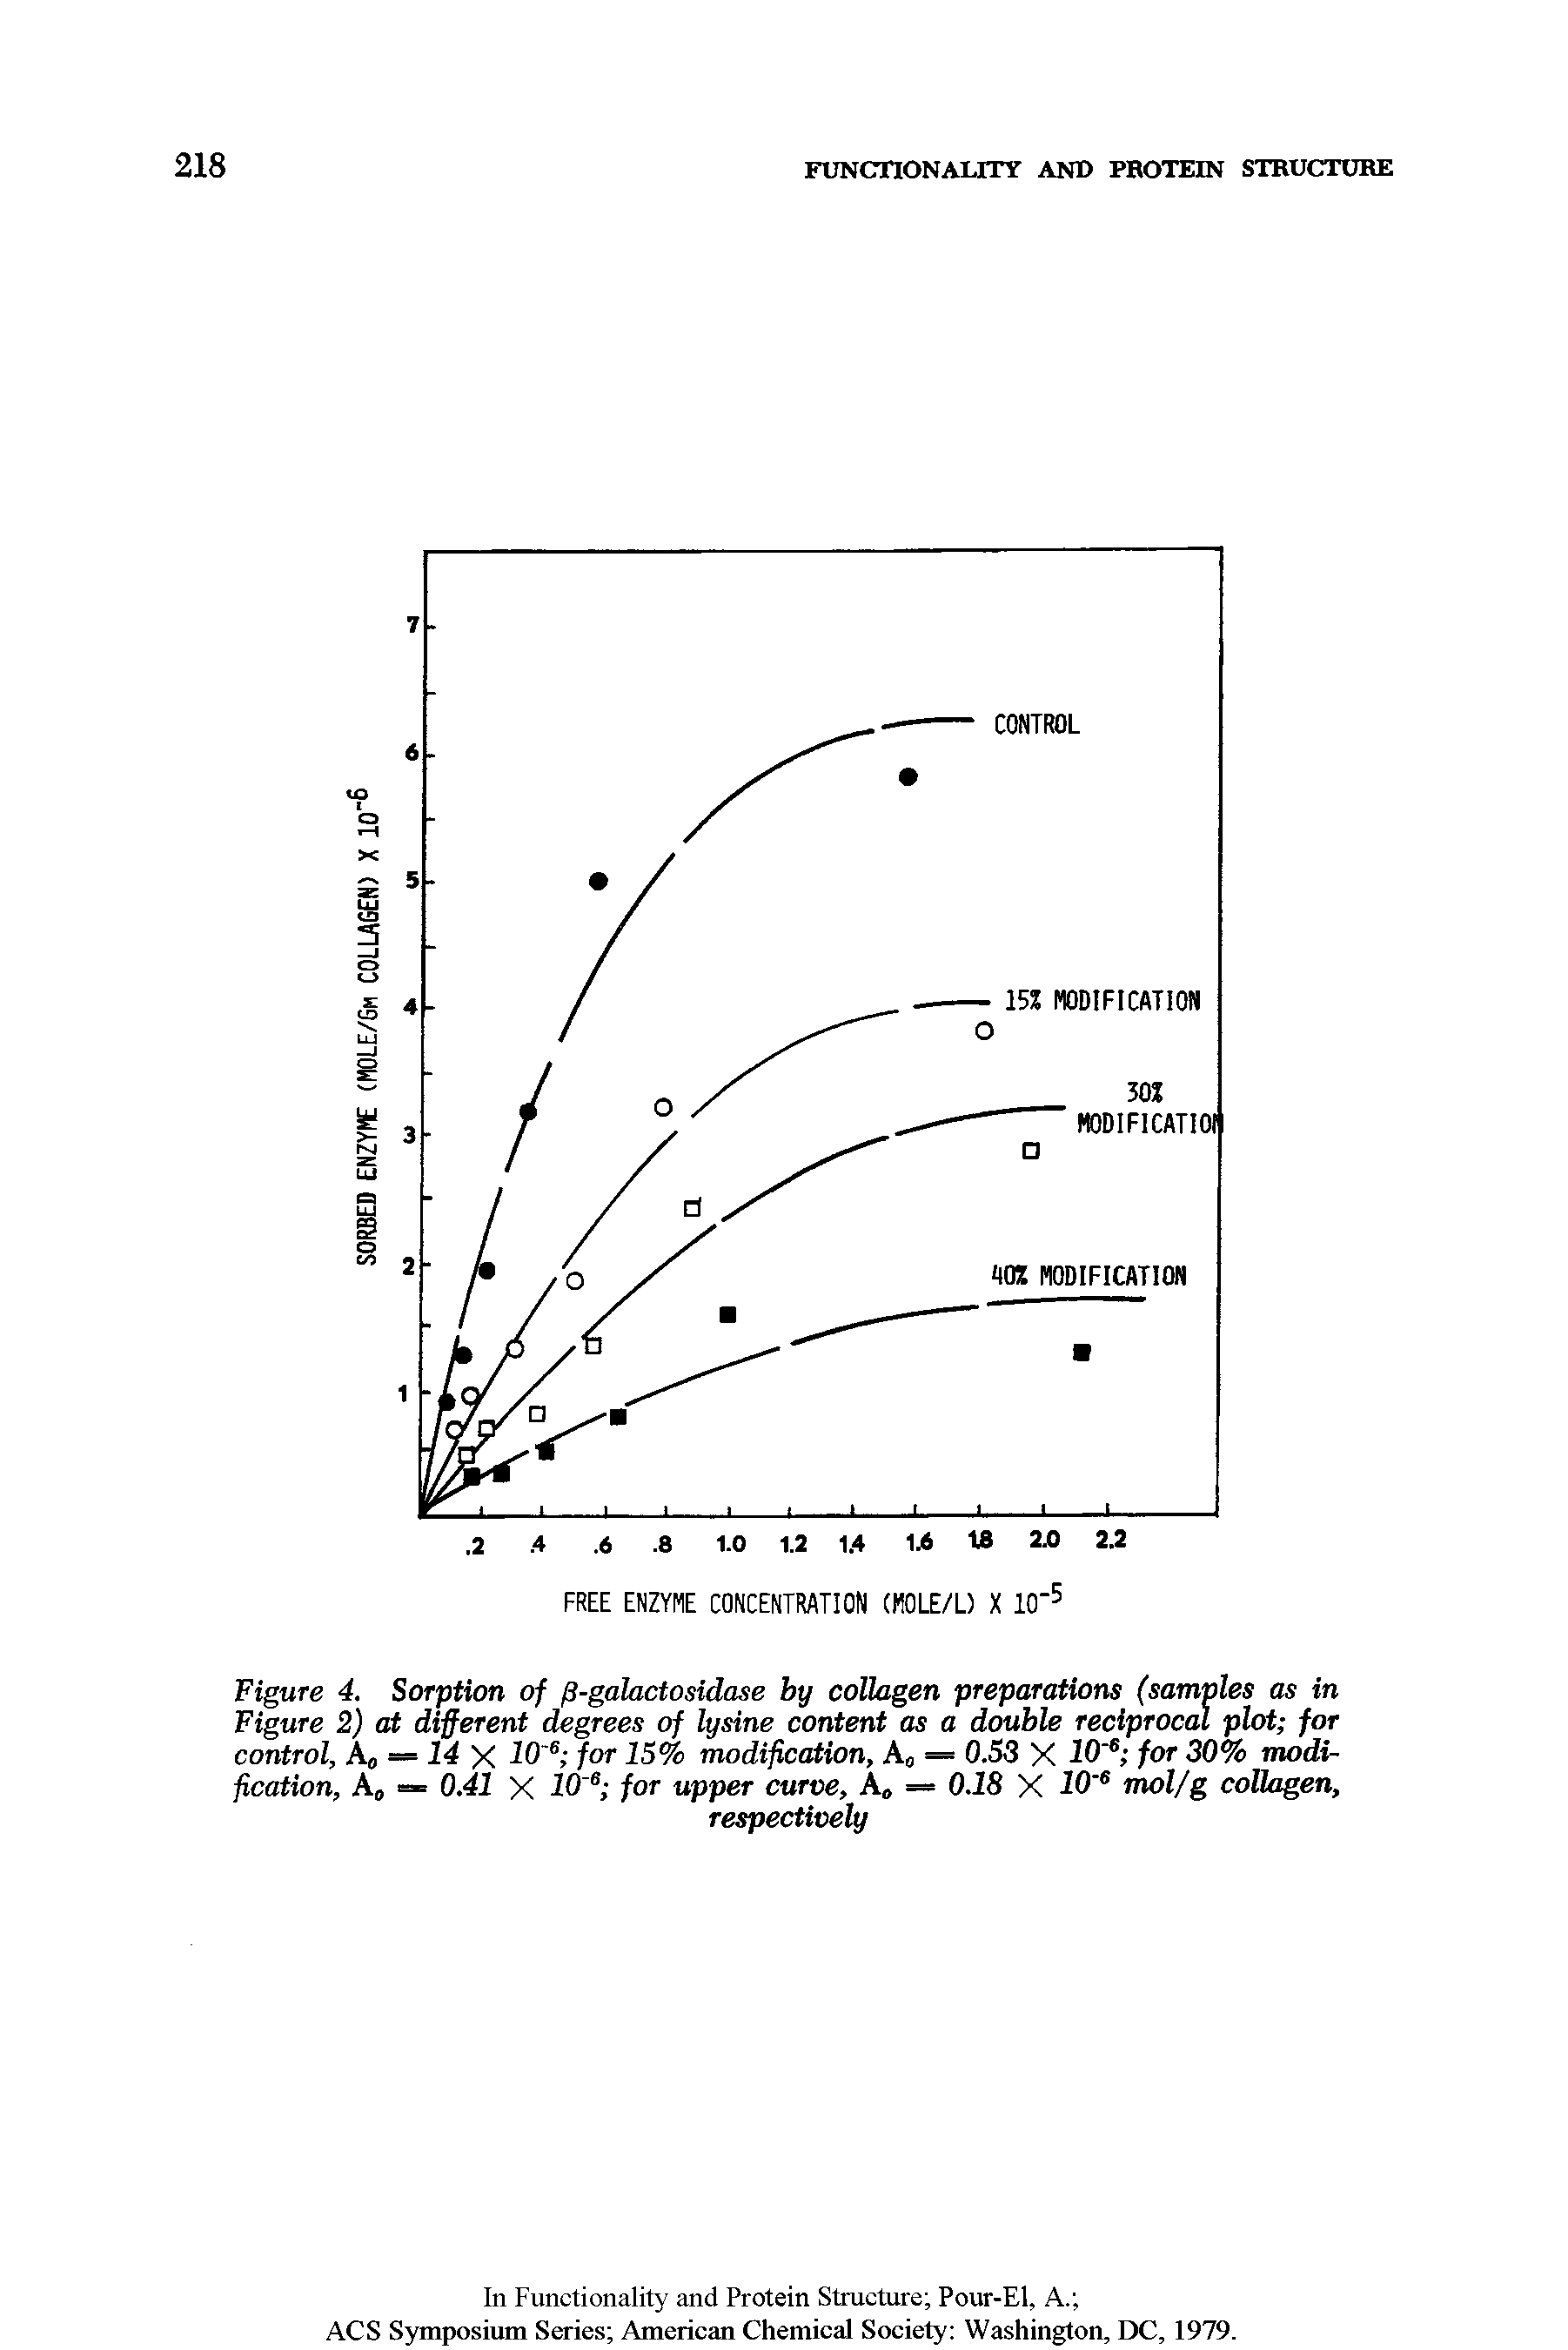 Figure 4. Sorption of p-galactosidase by collagen preparations (samples as in Figure 2) at different degrees of lysine content as a double reciprocal plot for control, Ac — 14 X 10 6 for 15% modification, A0 — 0.53 X 10 6 for 30% modification, Ac = 0.41 X 10 6 for upper curve, A = 0.18 X 10 6 mol/g collagen,...